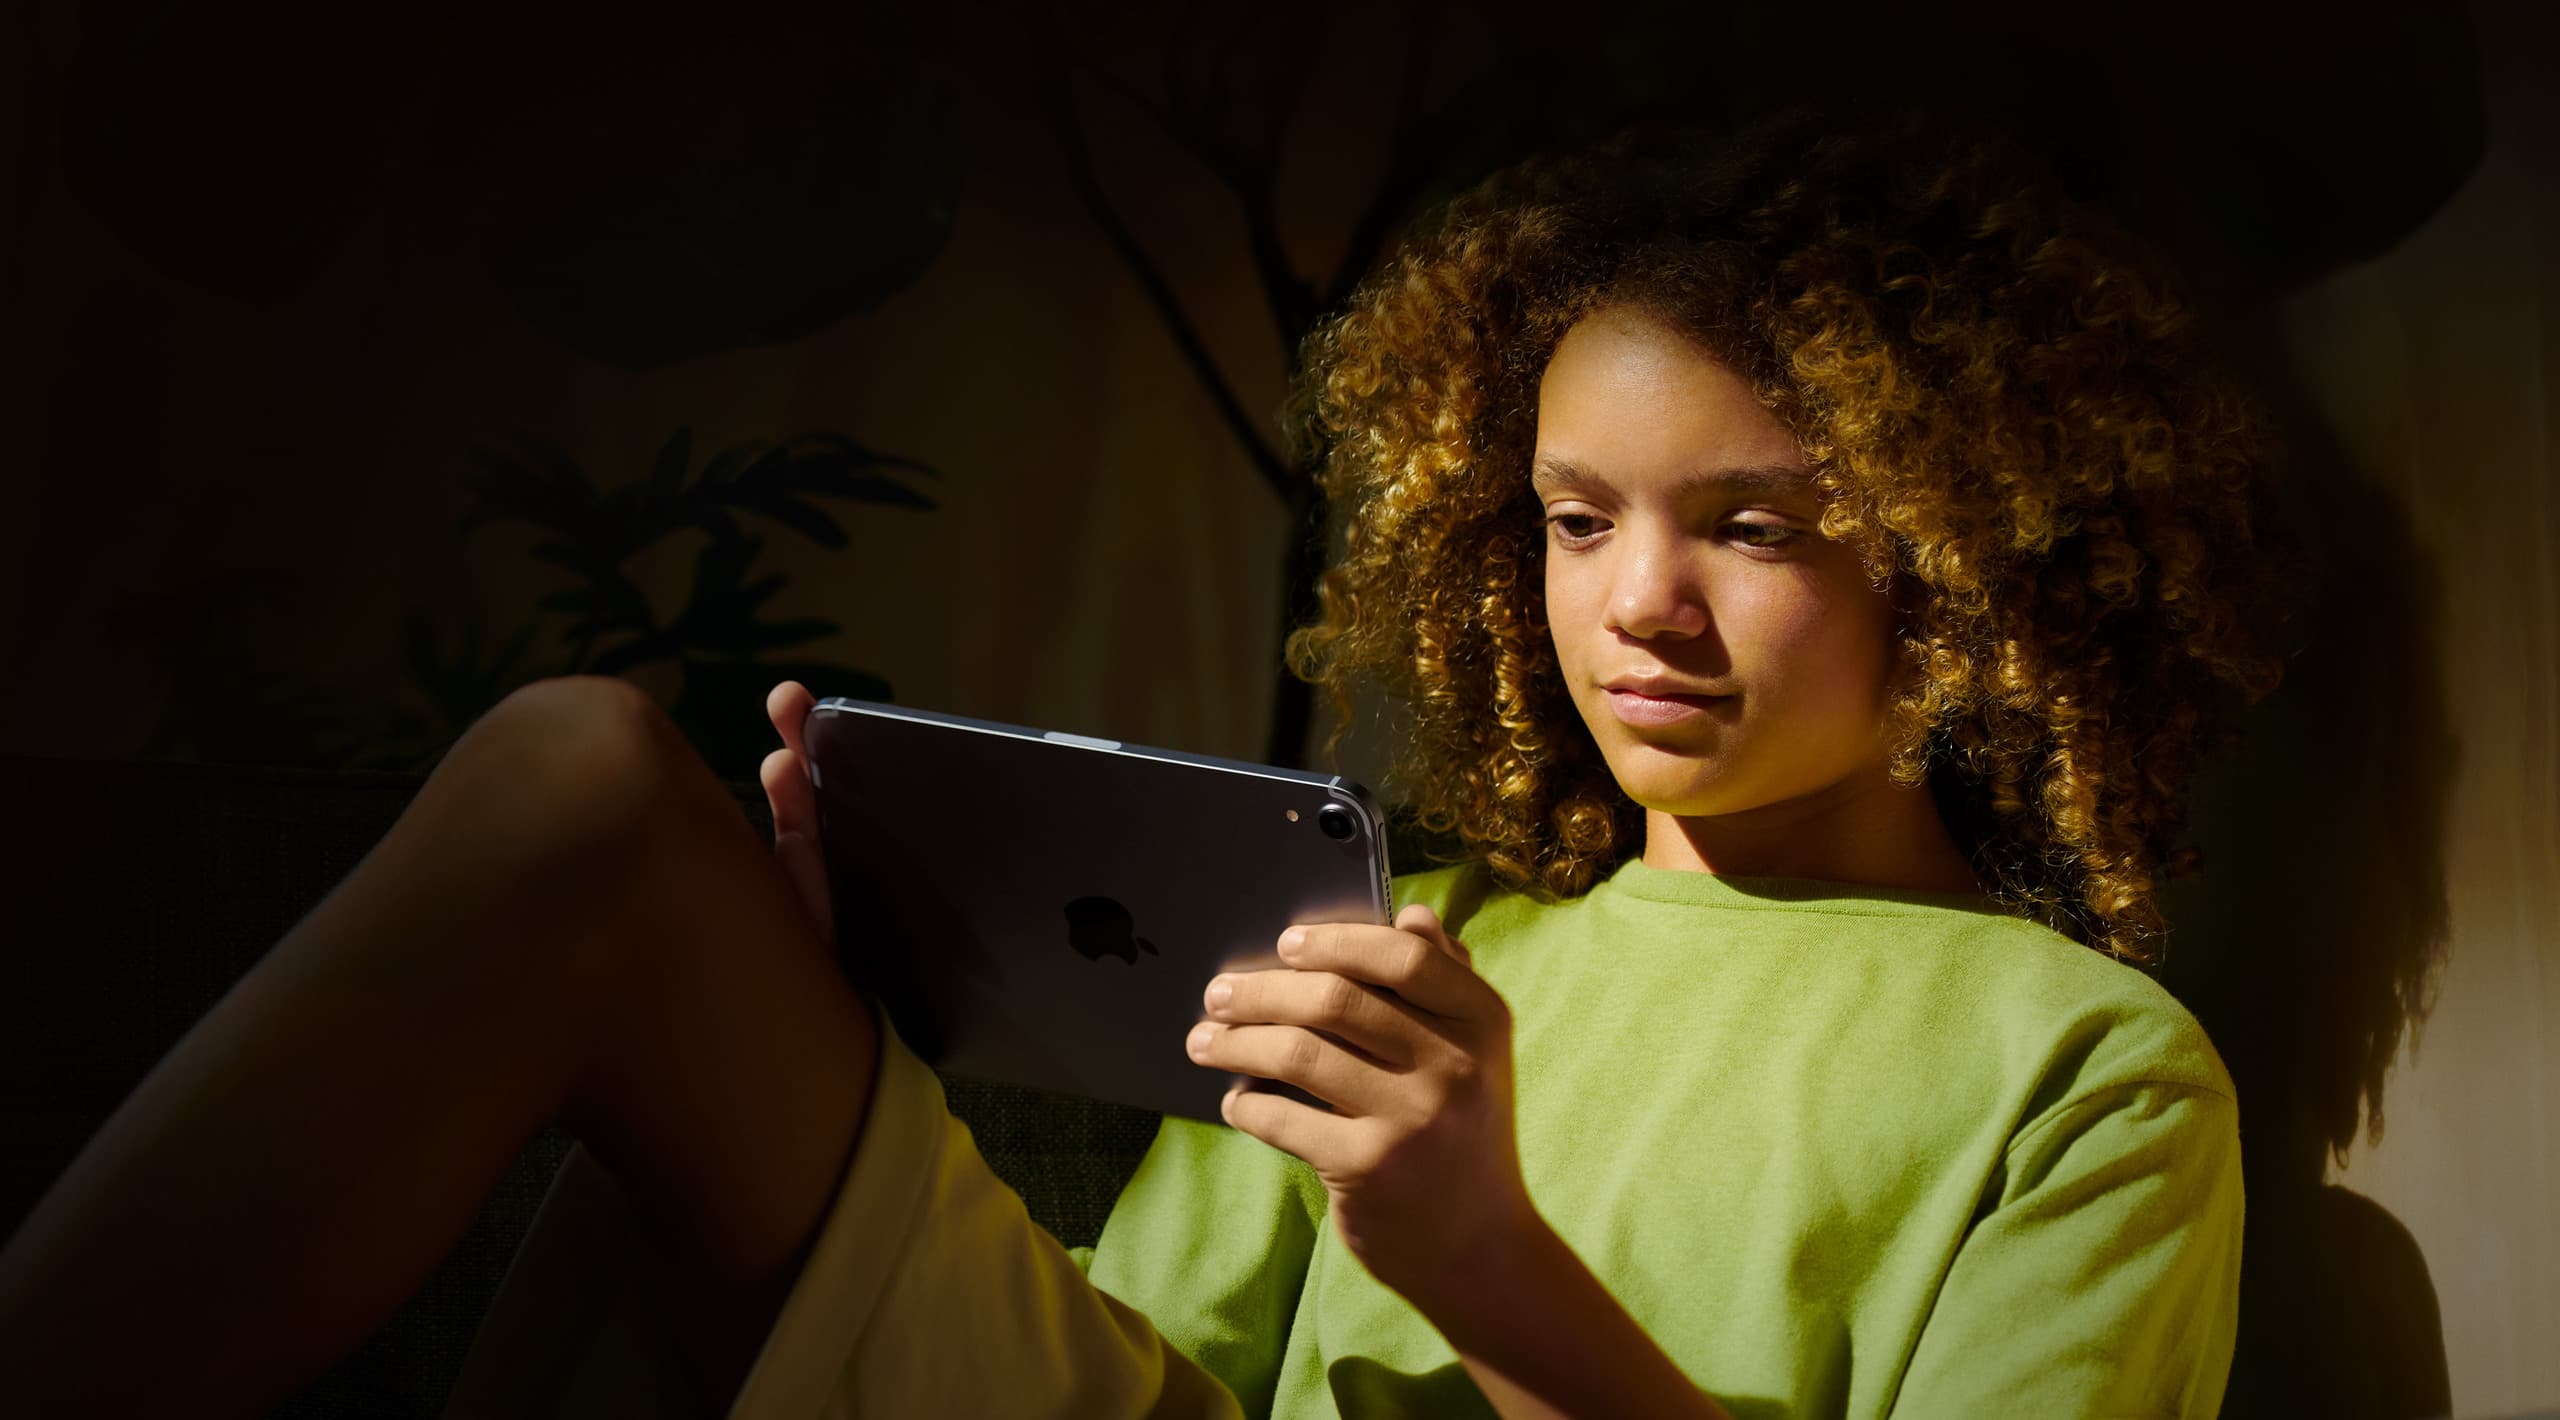 9 things to do before handing your iPhone or iPad to kids